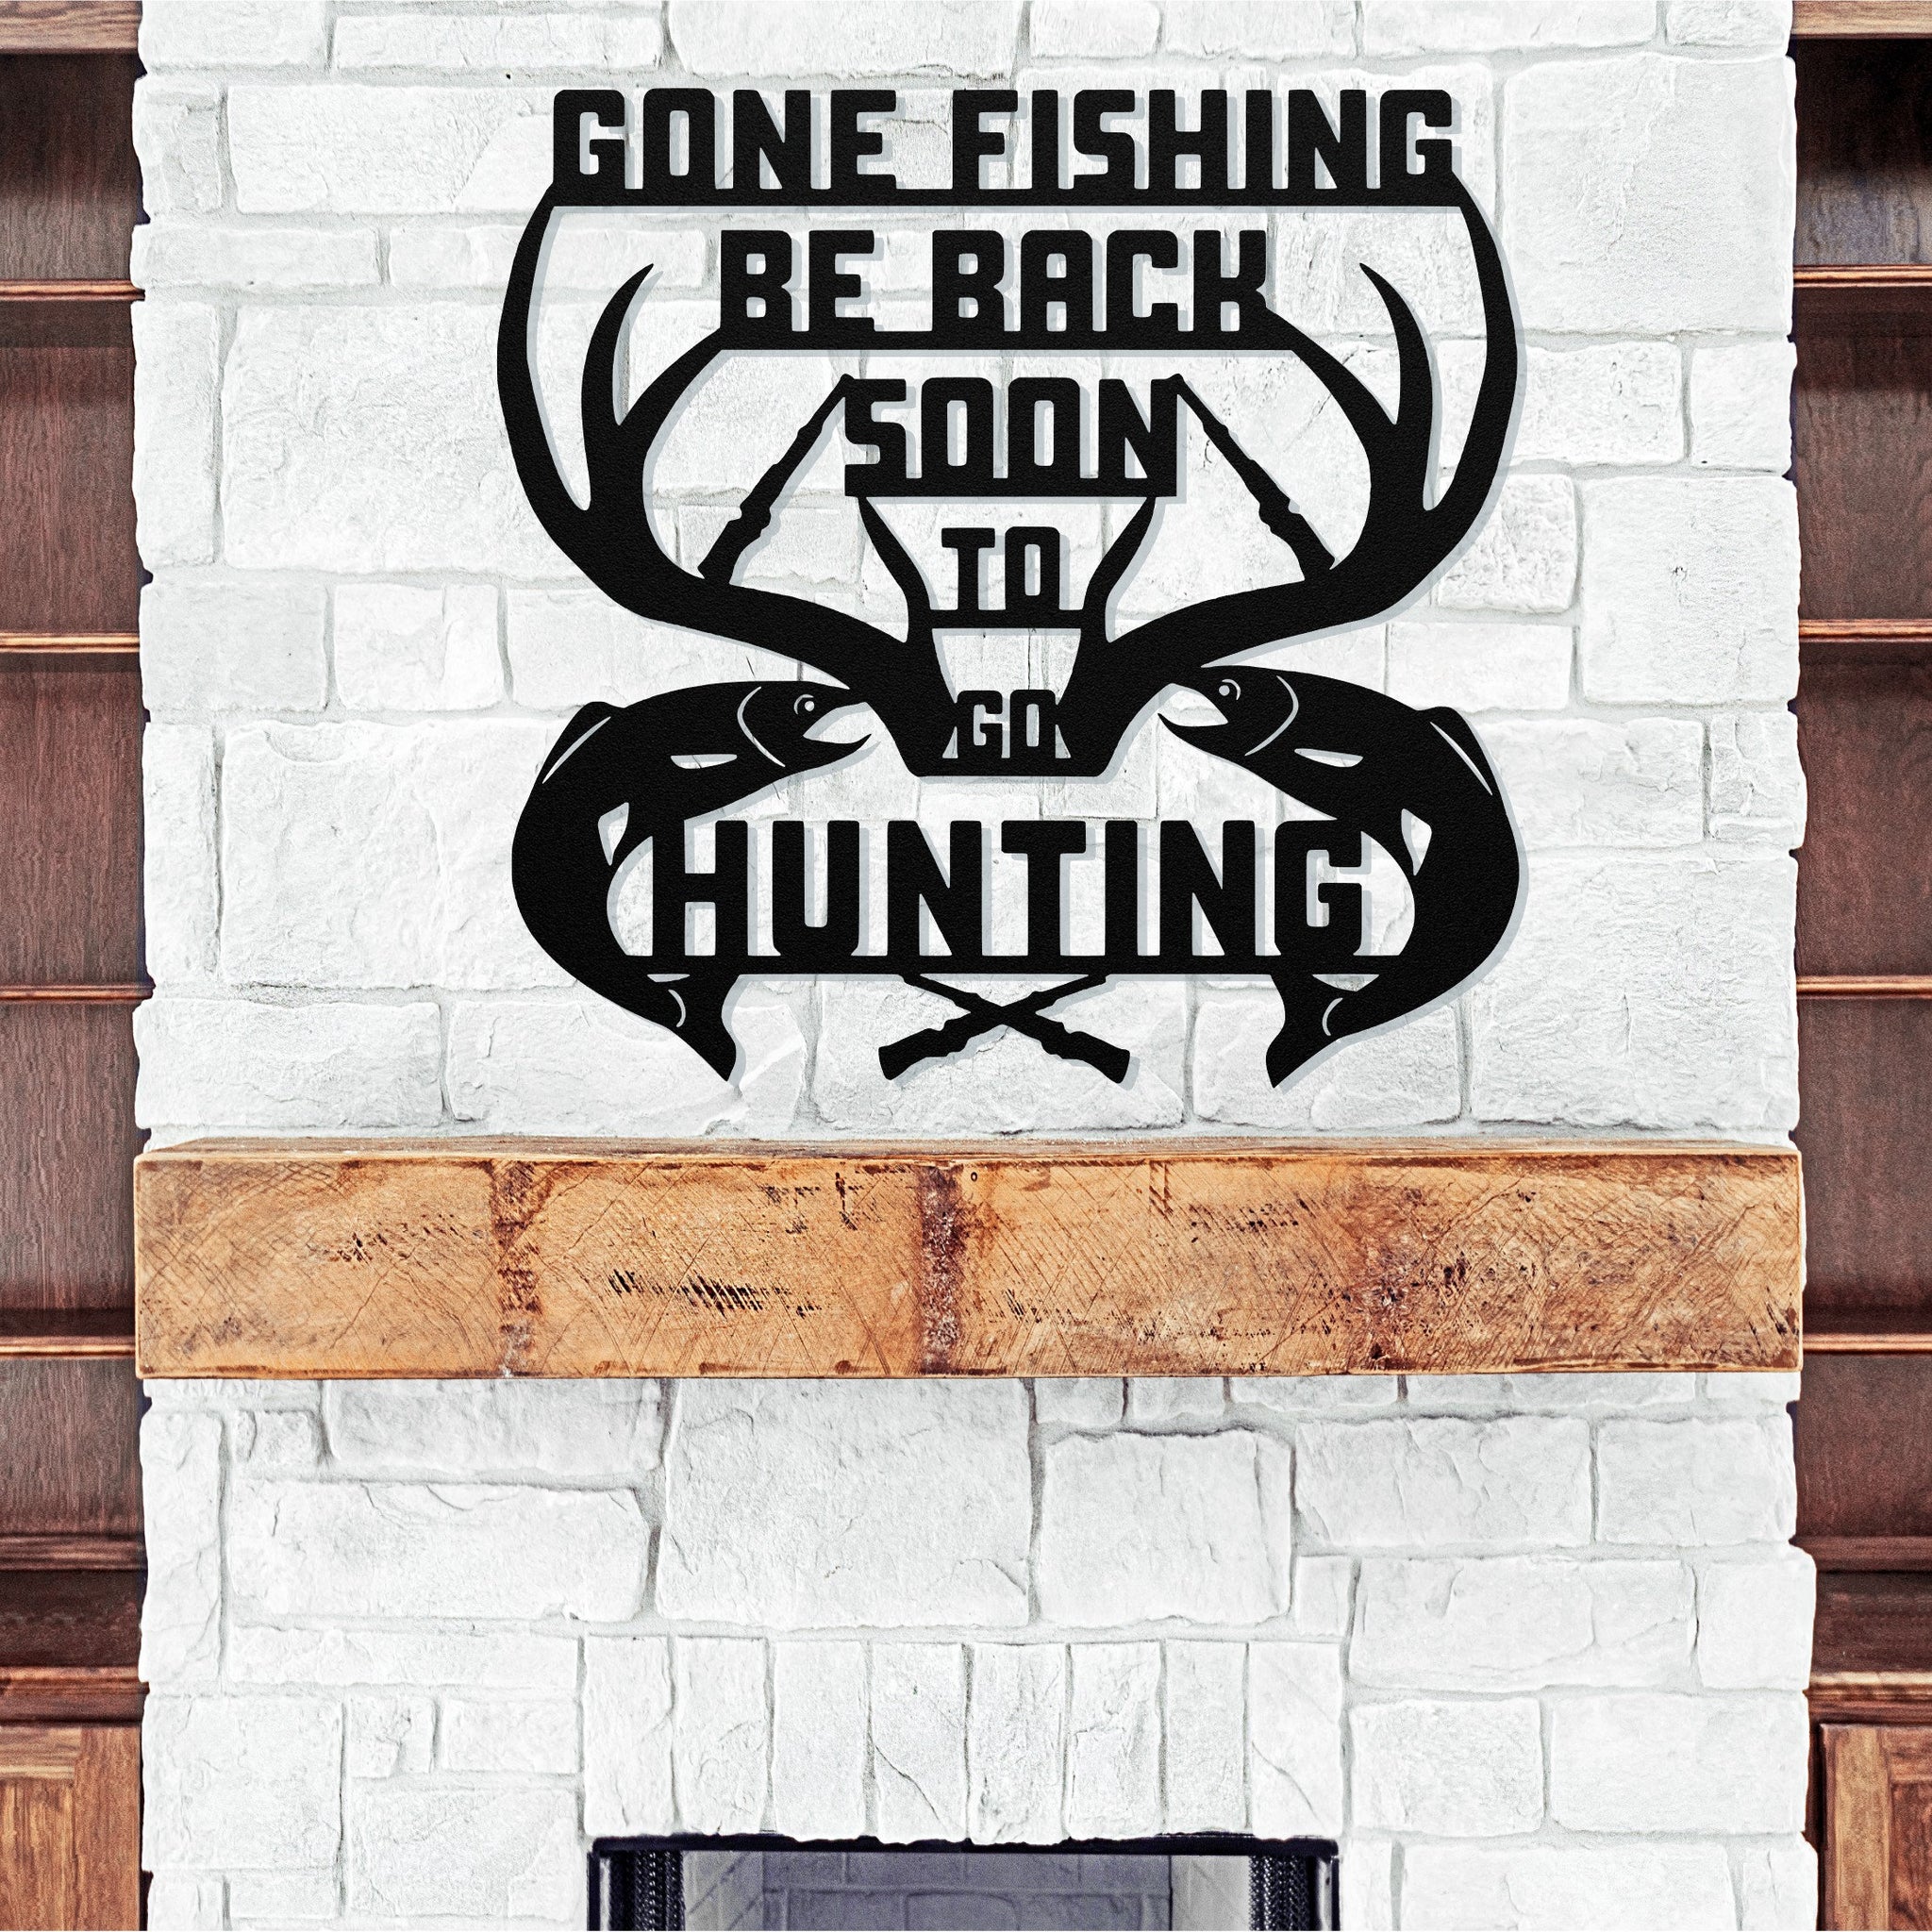 Gone Fishing Be Back Soon To Go Hunting ~ Metal Porch Sign